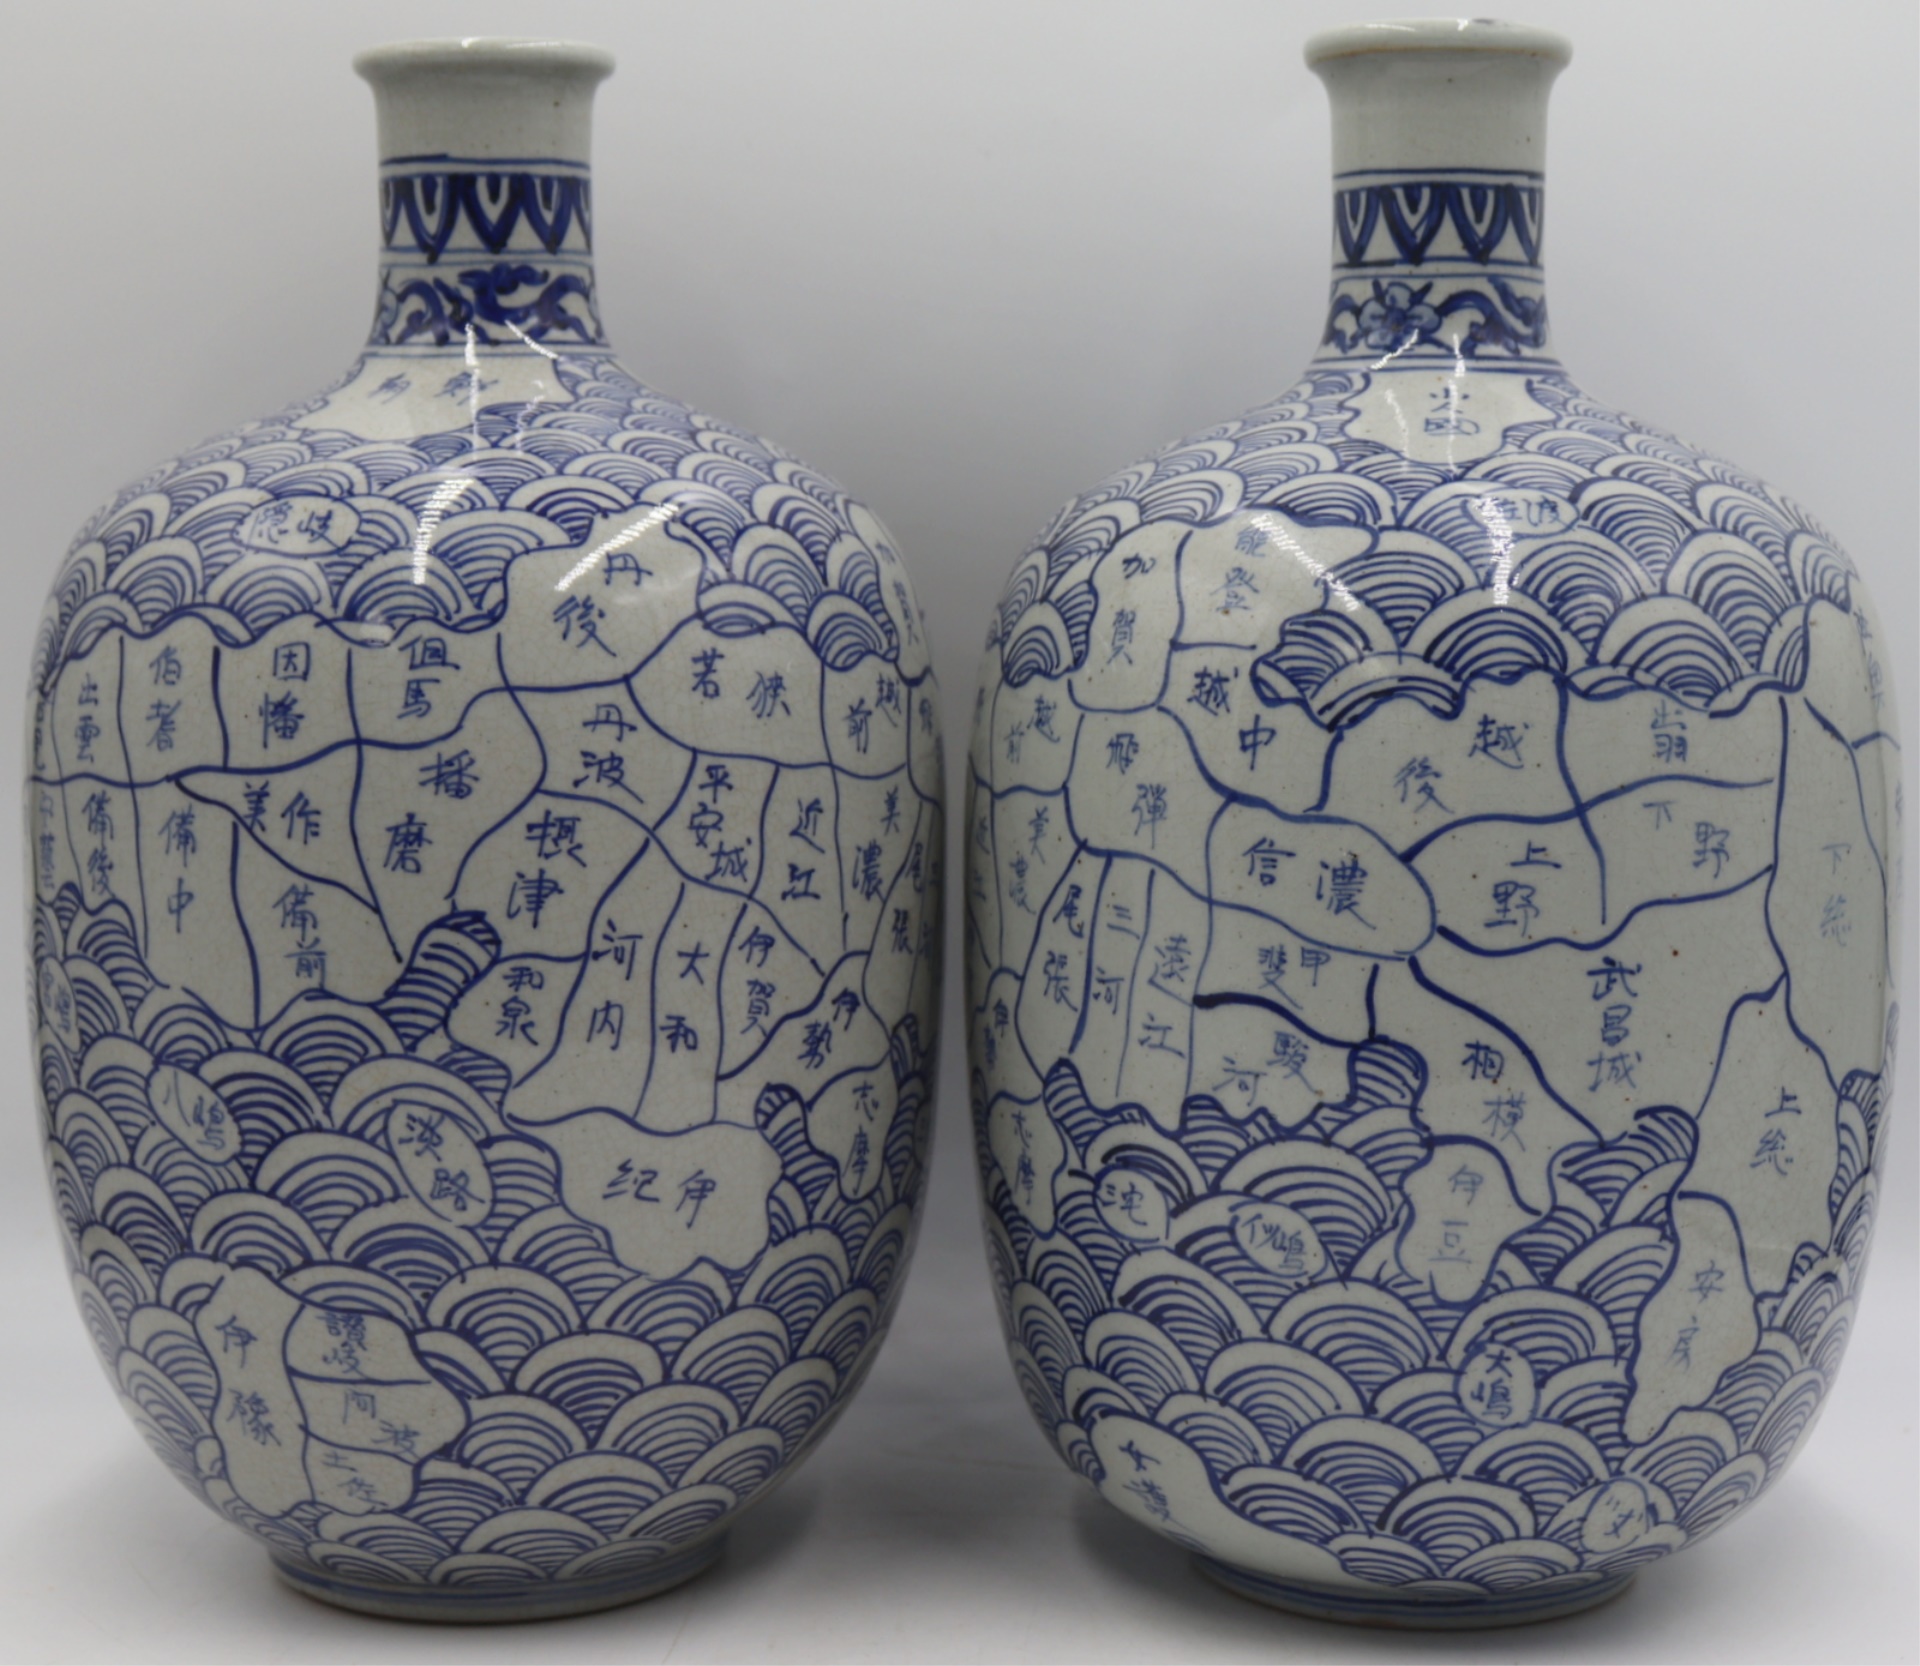 PAIR OF SIGNED JAPANESE PORCELAIN 3bbe7b